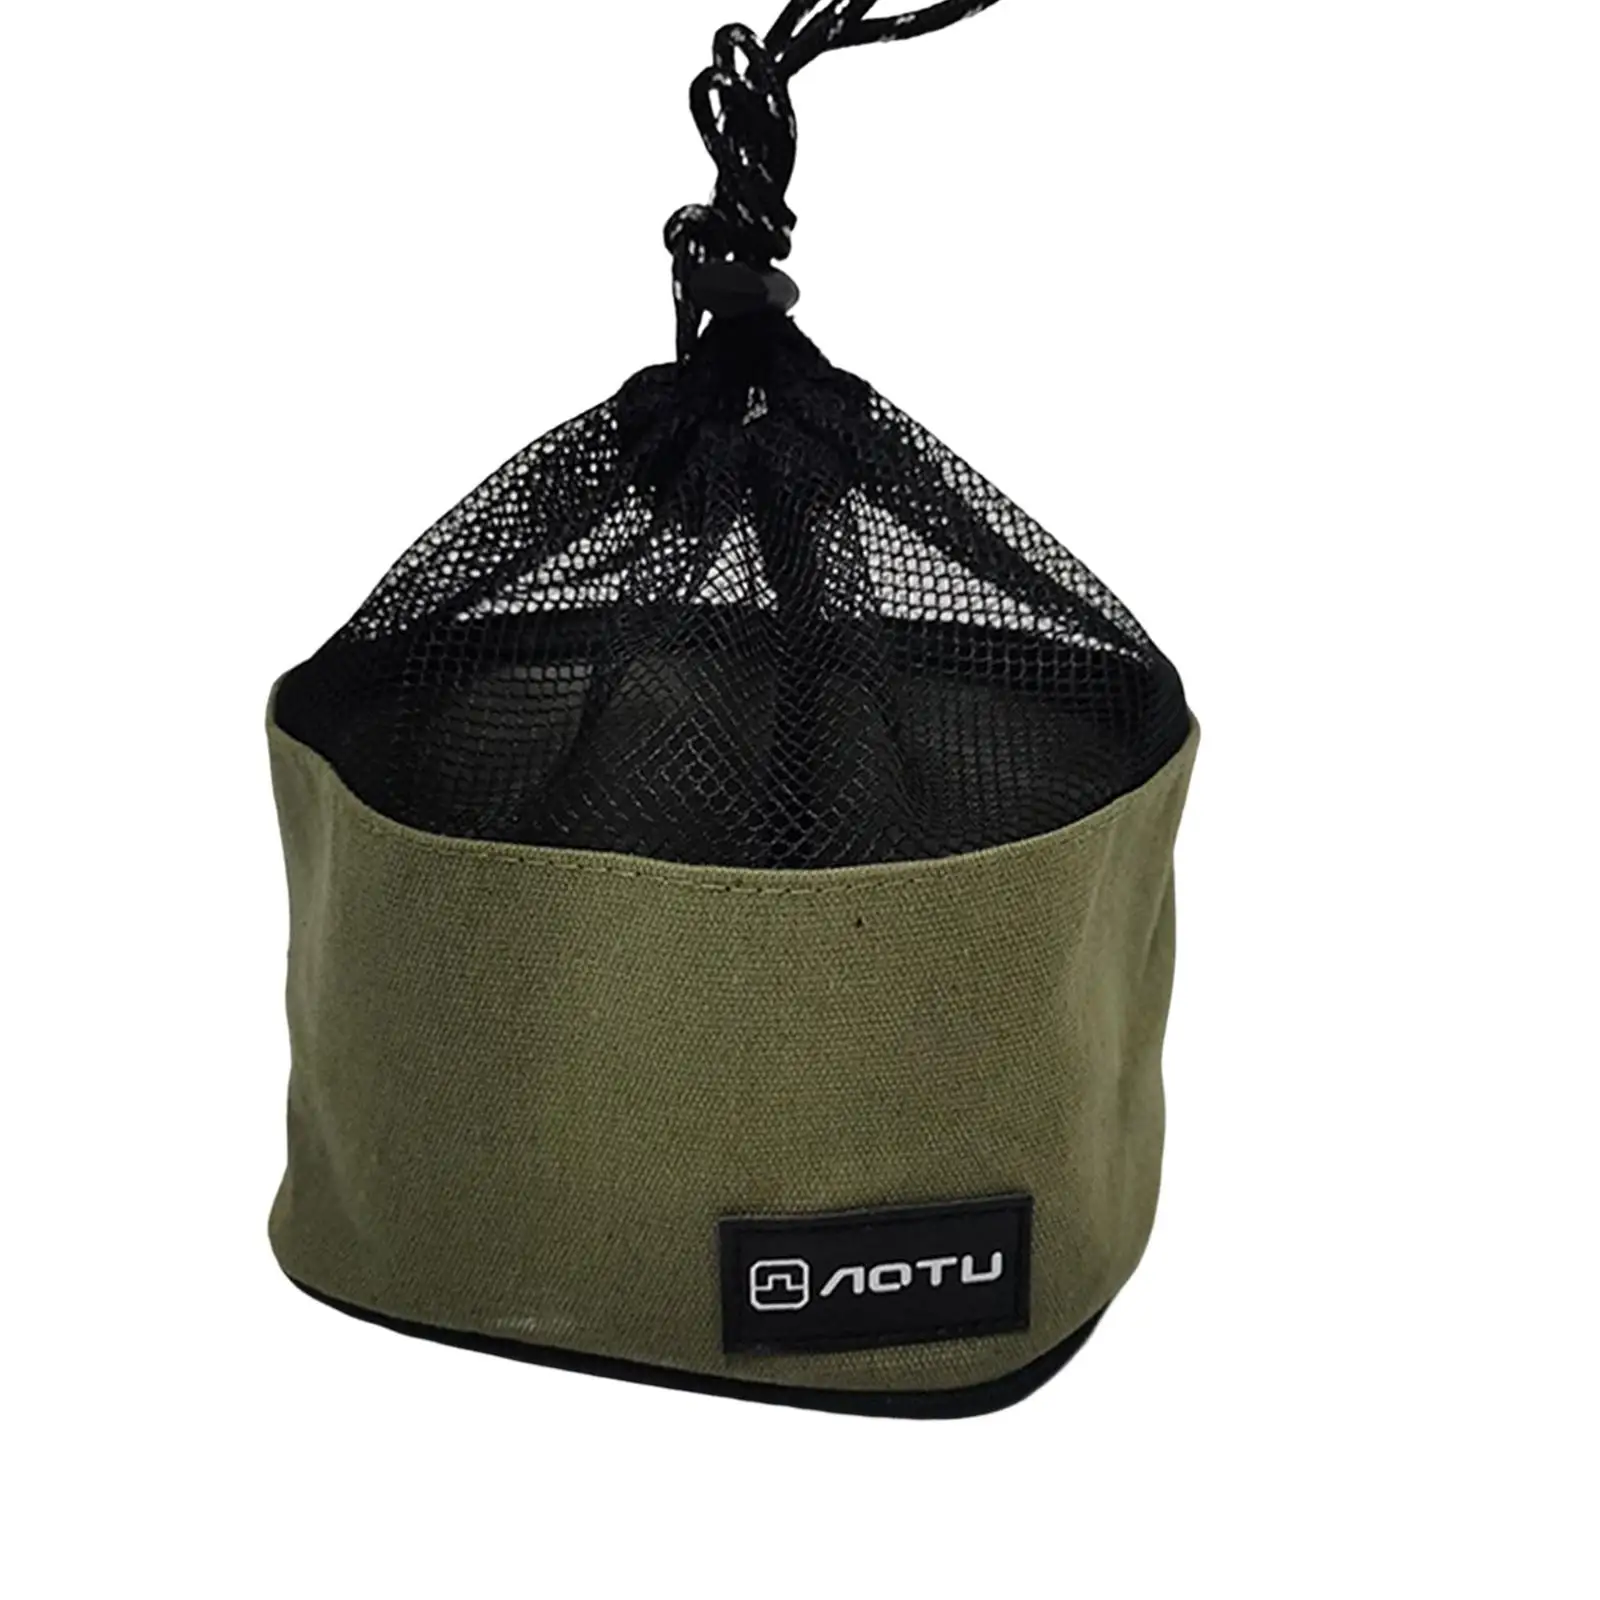 Portable Camping Cooking Utensils Organizer Pouch Drawstring Bag Equipment Tote Carrier for Outdoor BBQ Dinner Hiking Travel